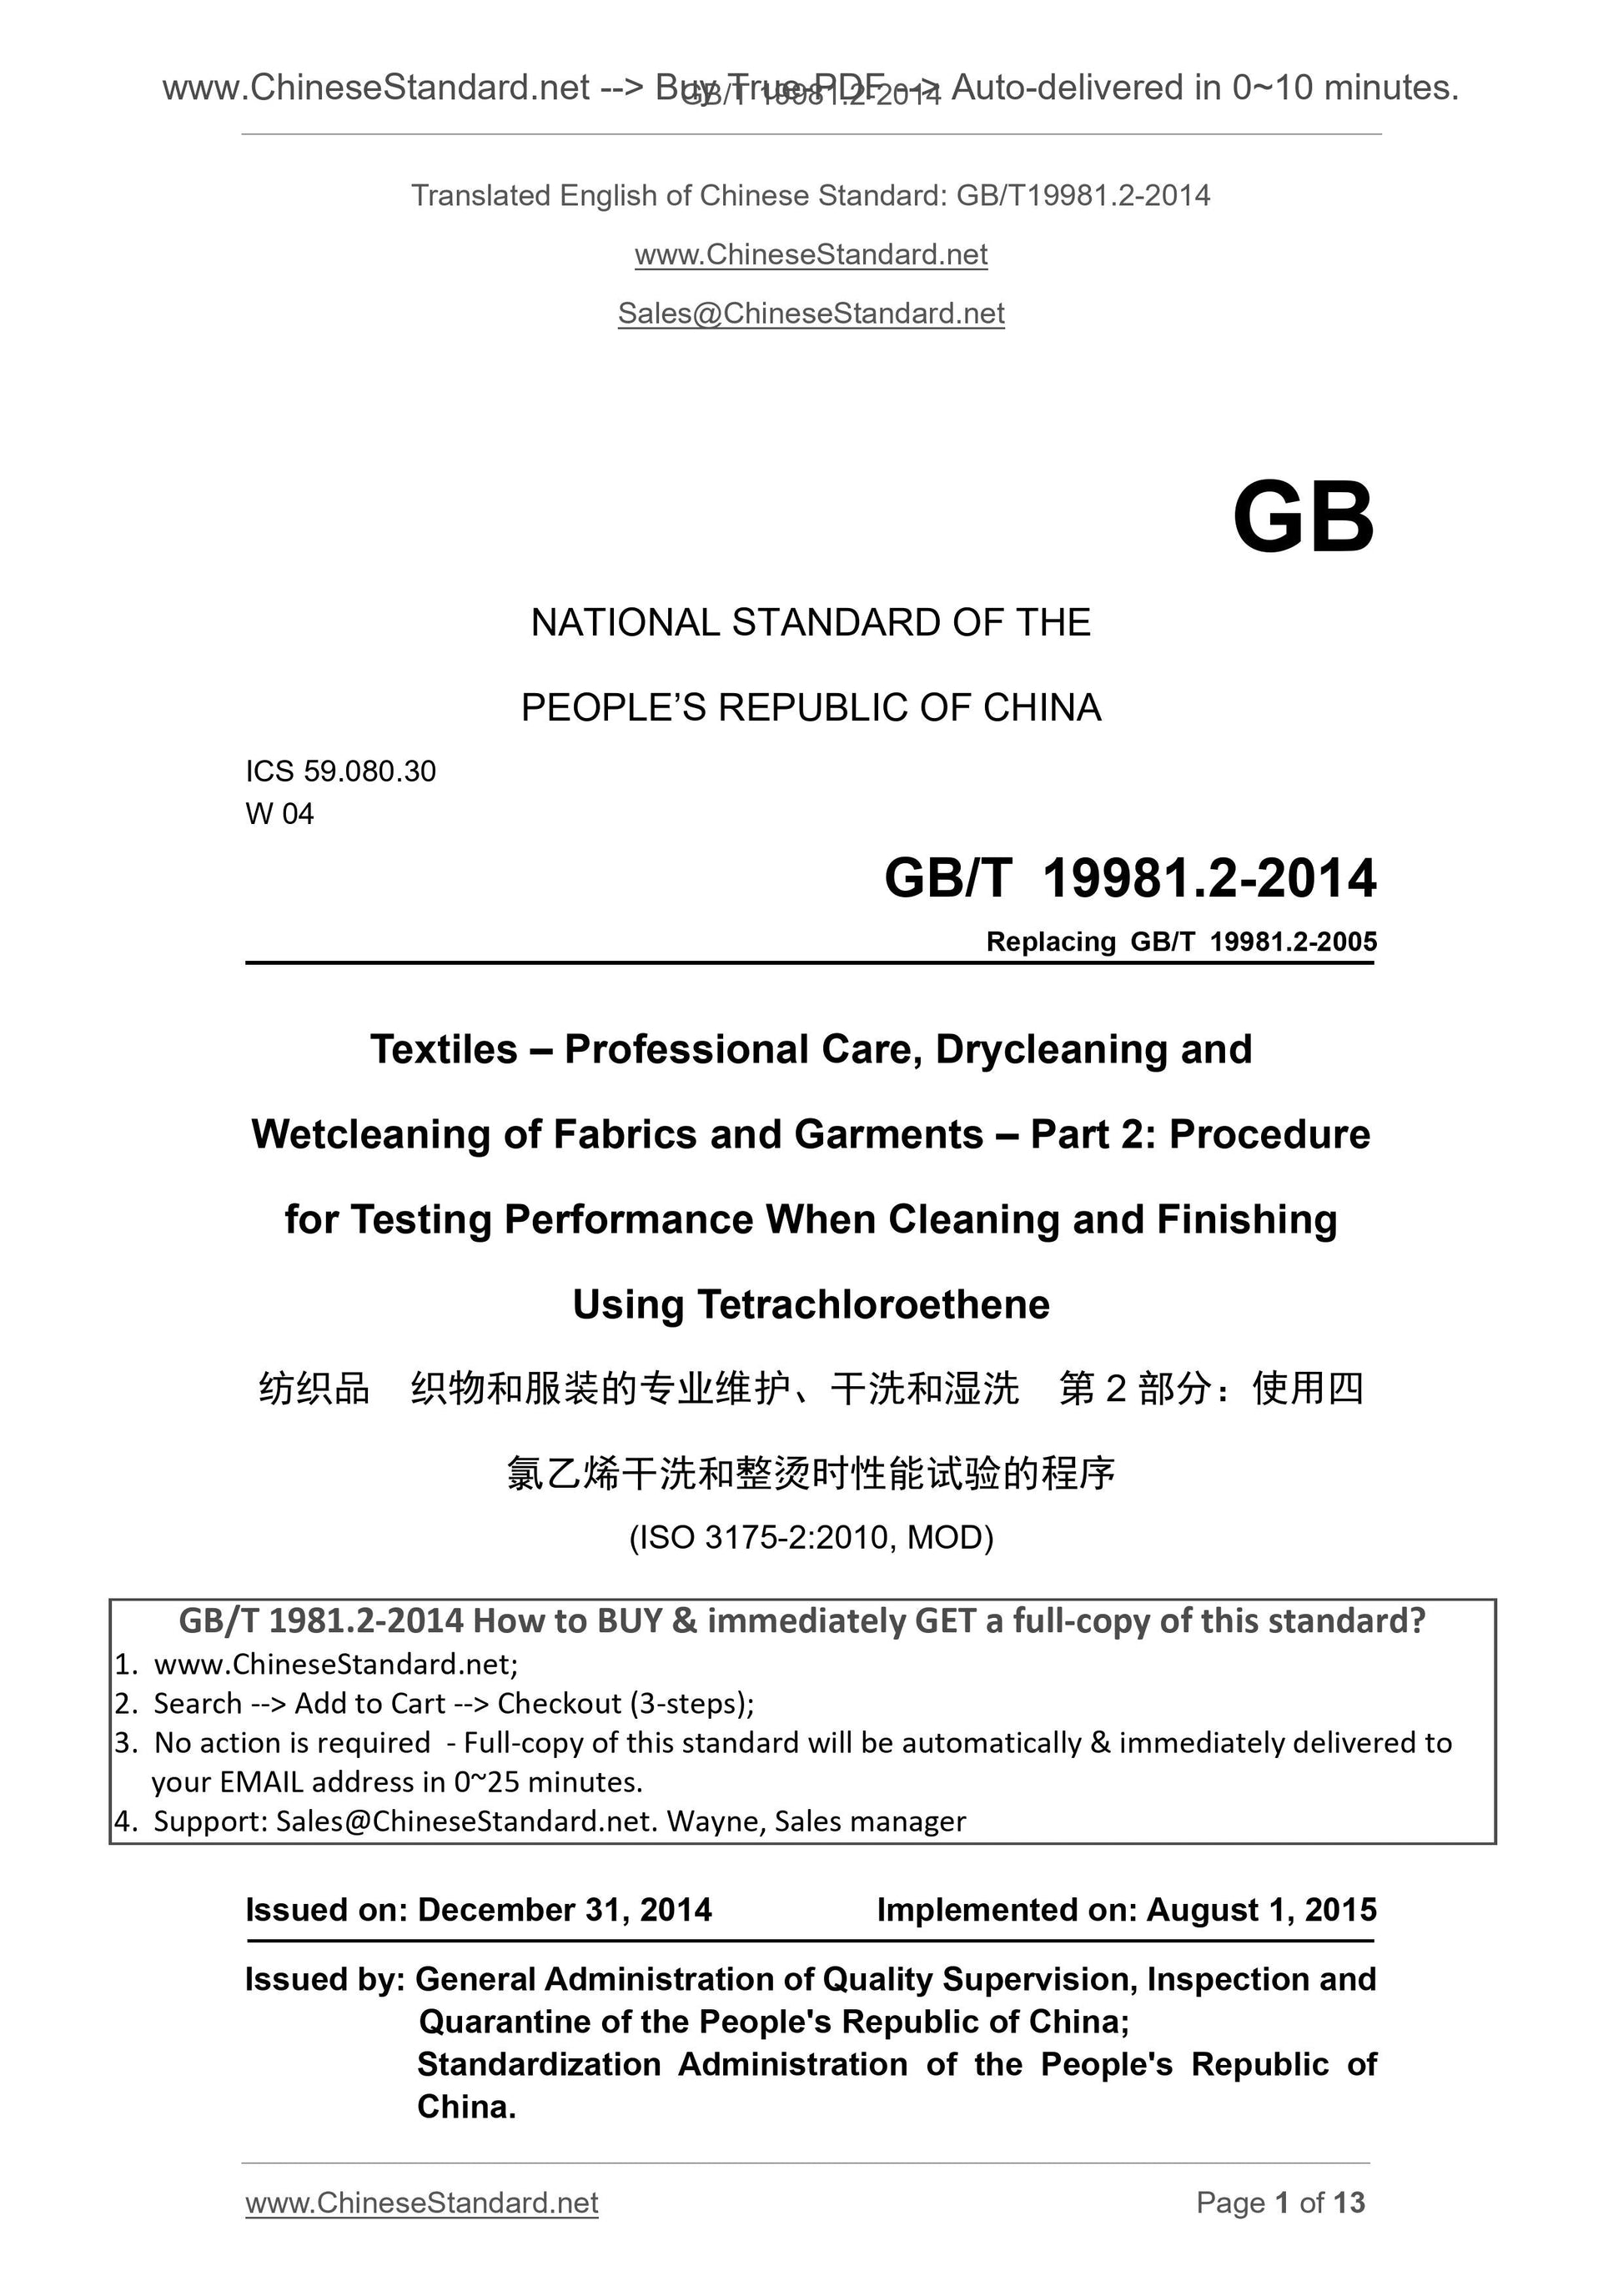 GB/T 19981.2-2014 Page 1